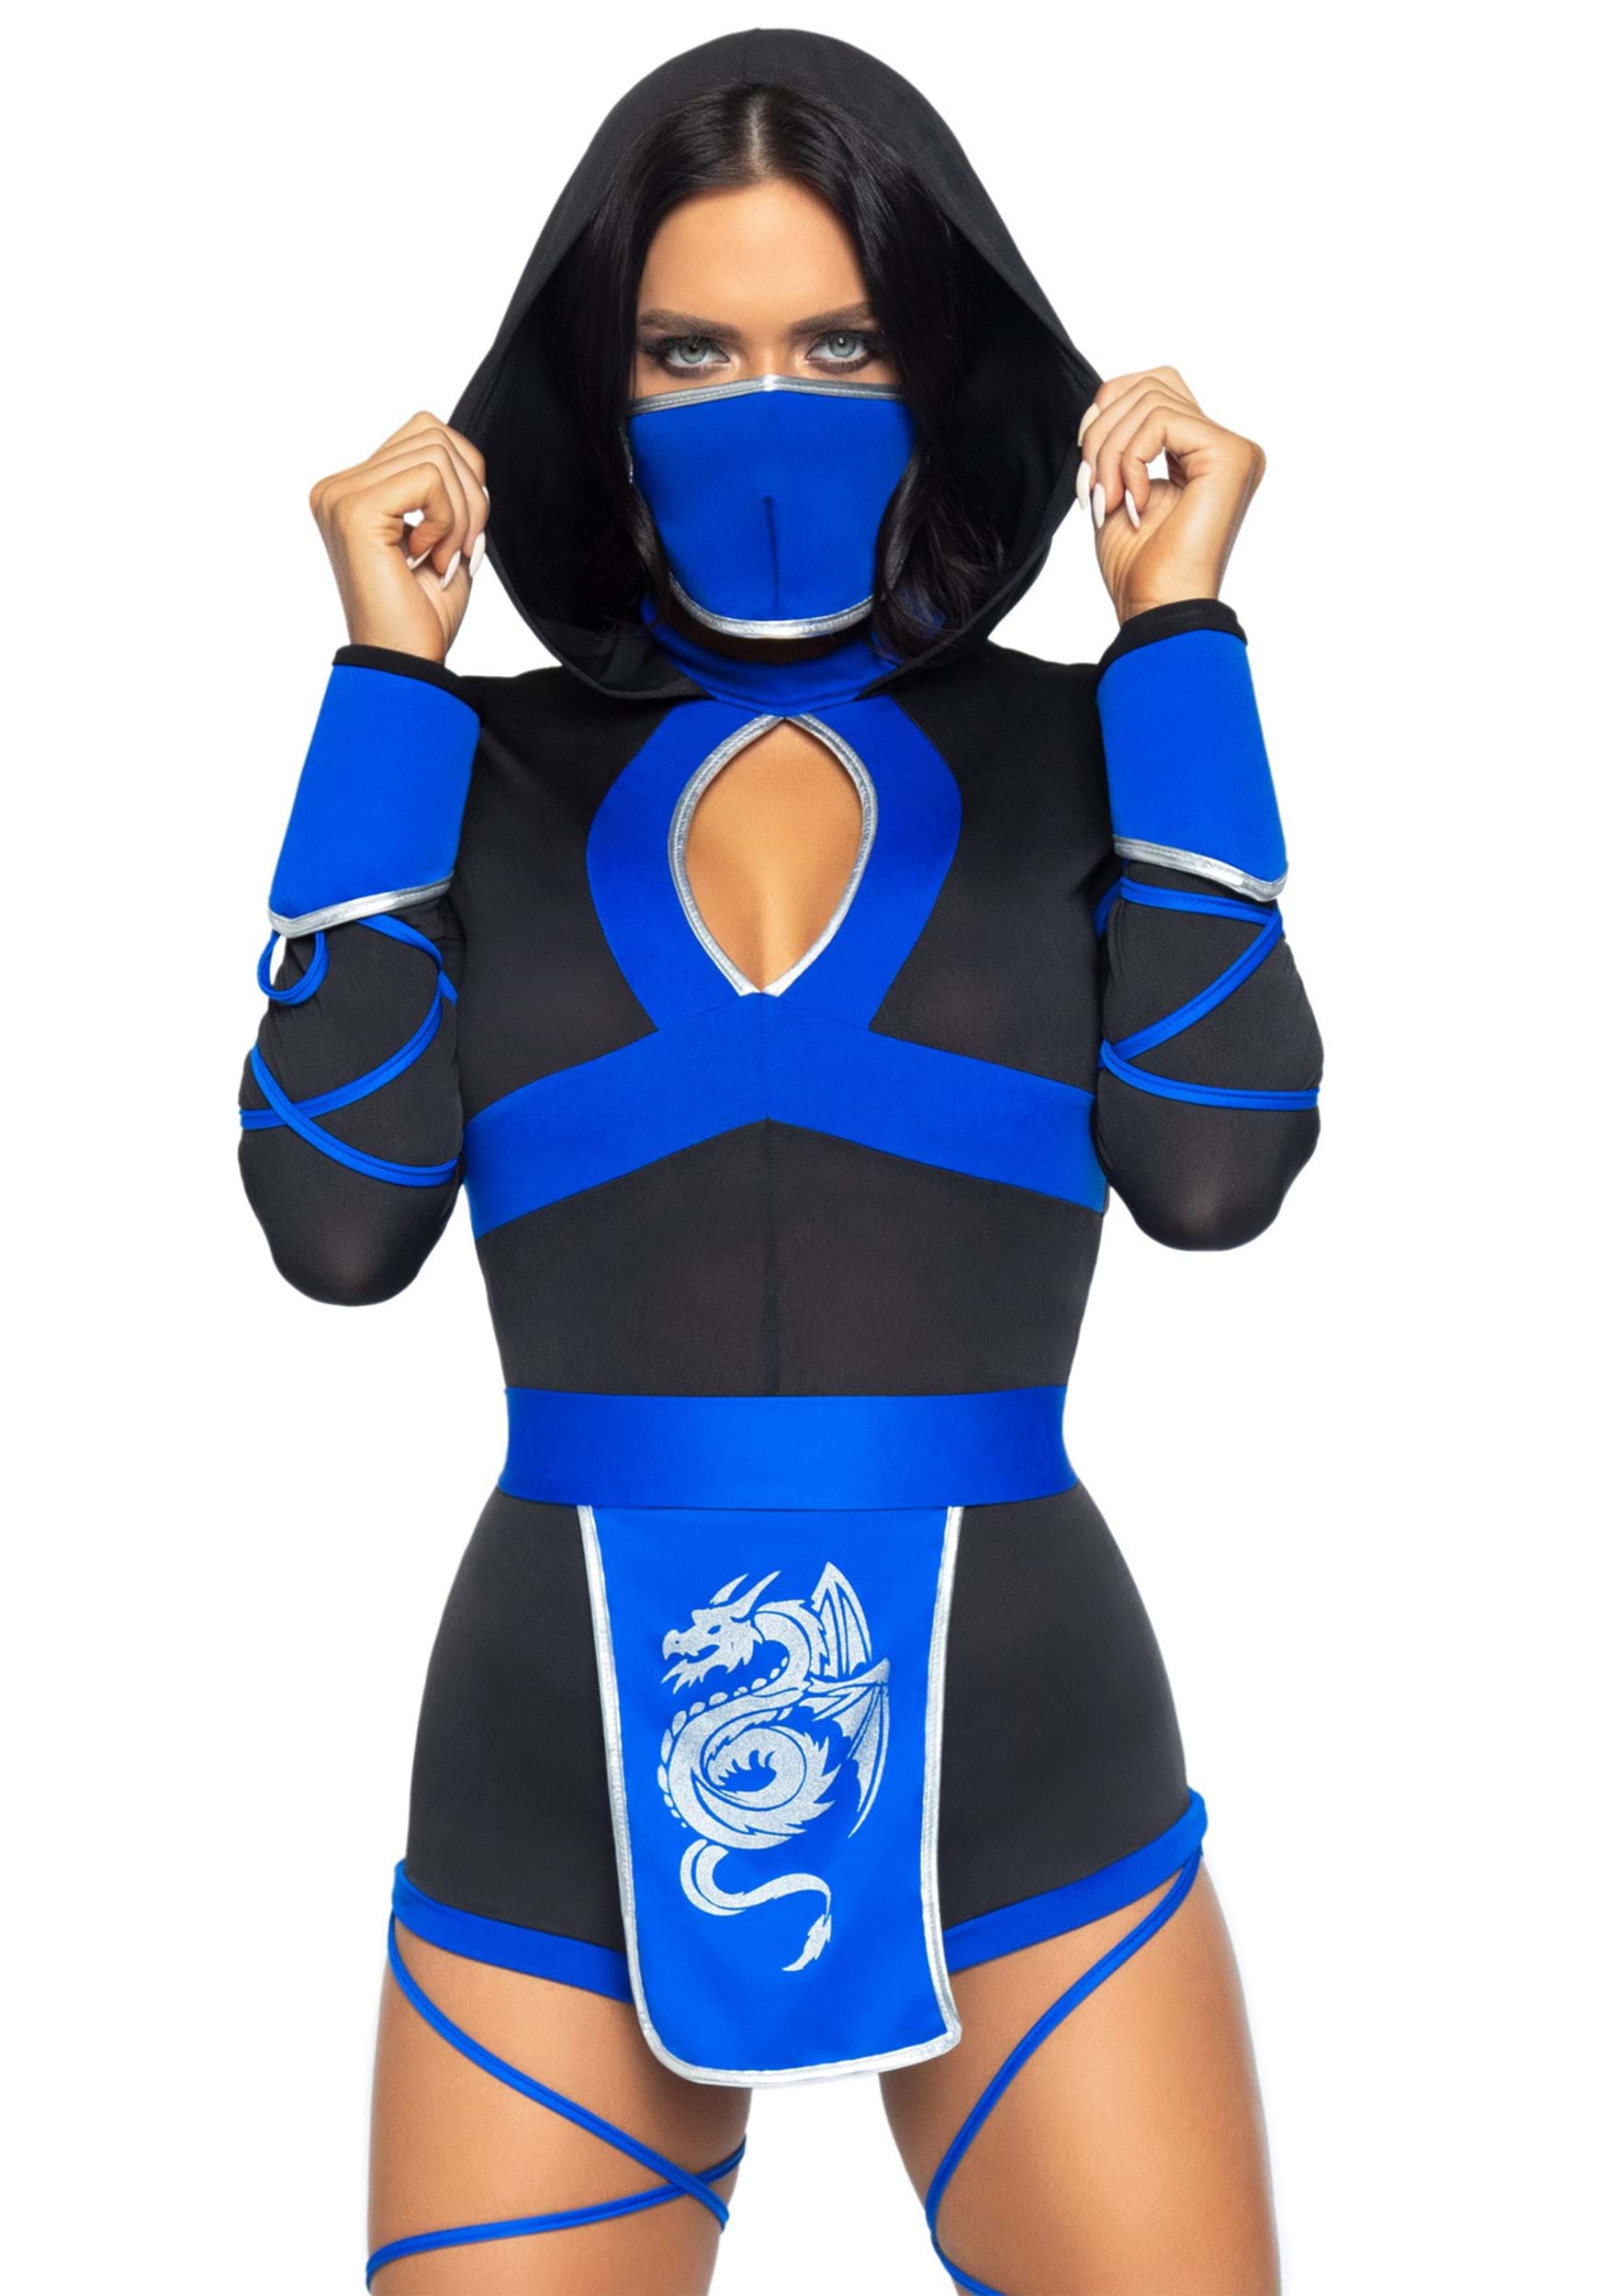 Blue Ninja Suit Bodysuit Cosplay Costume with Mask and Gloves for Halloween